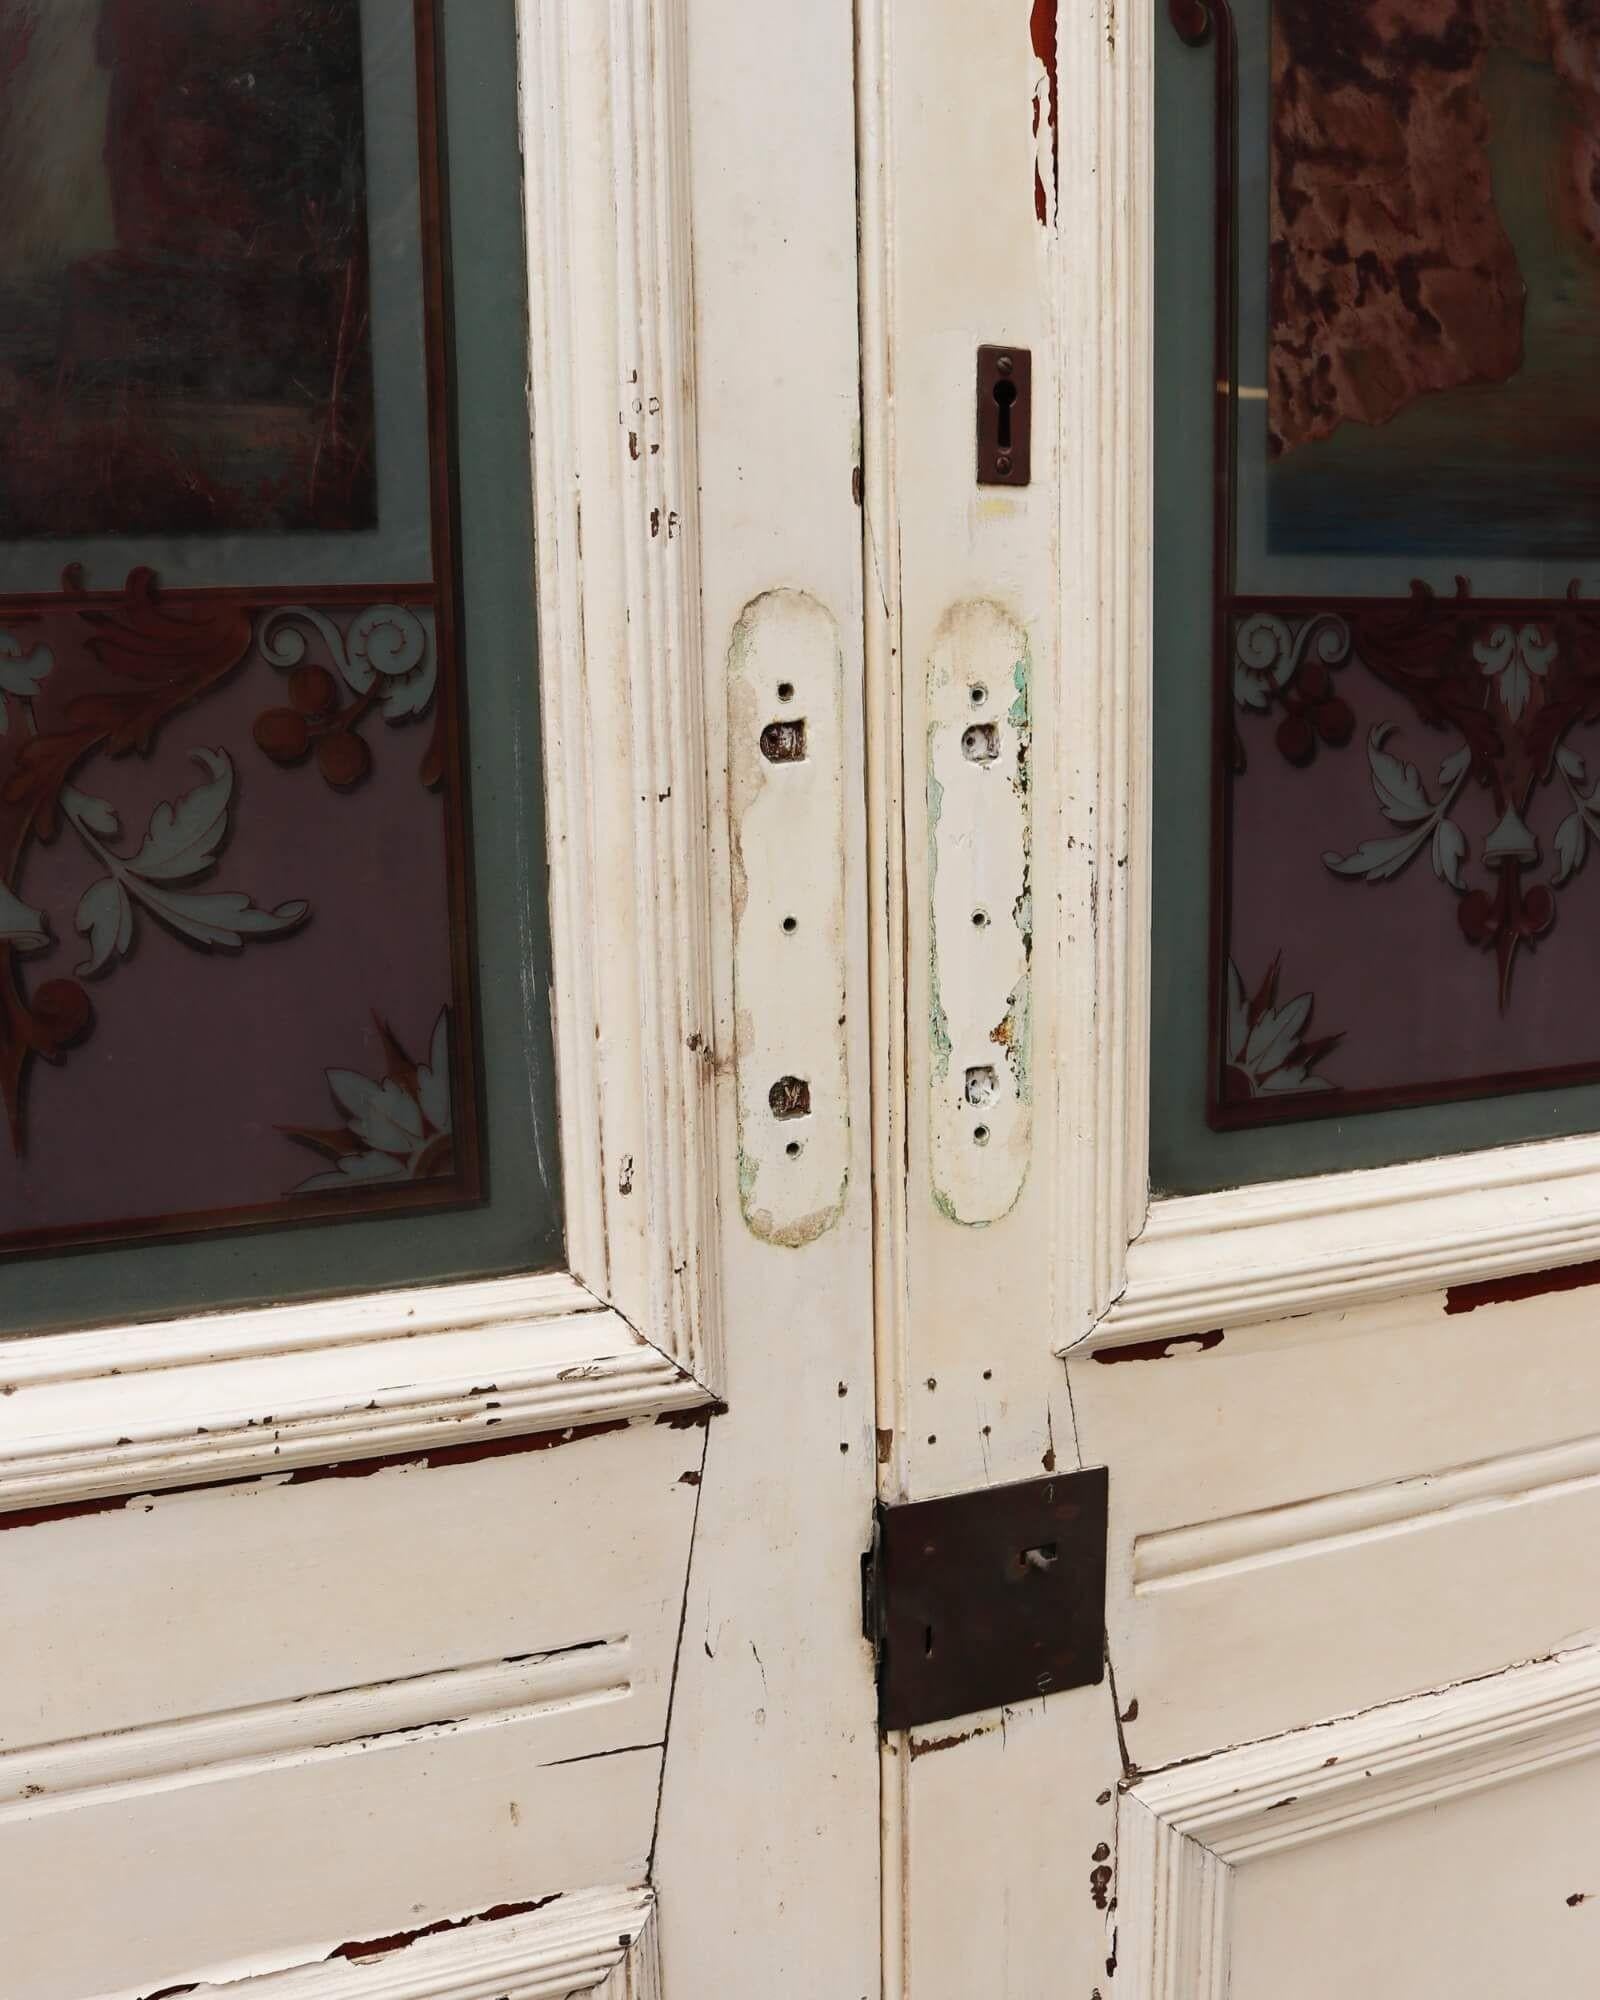 19th Century Set of Handpainted Antique Stained Glass Double Doors For Sale